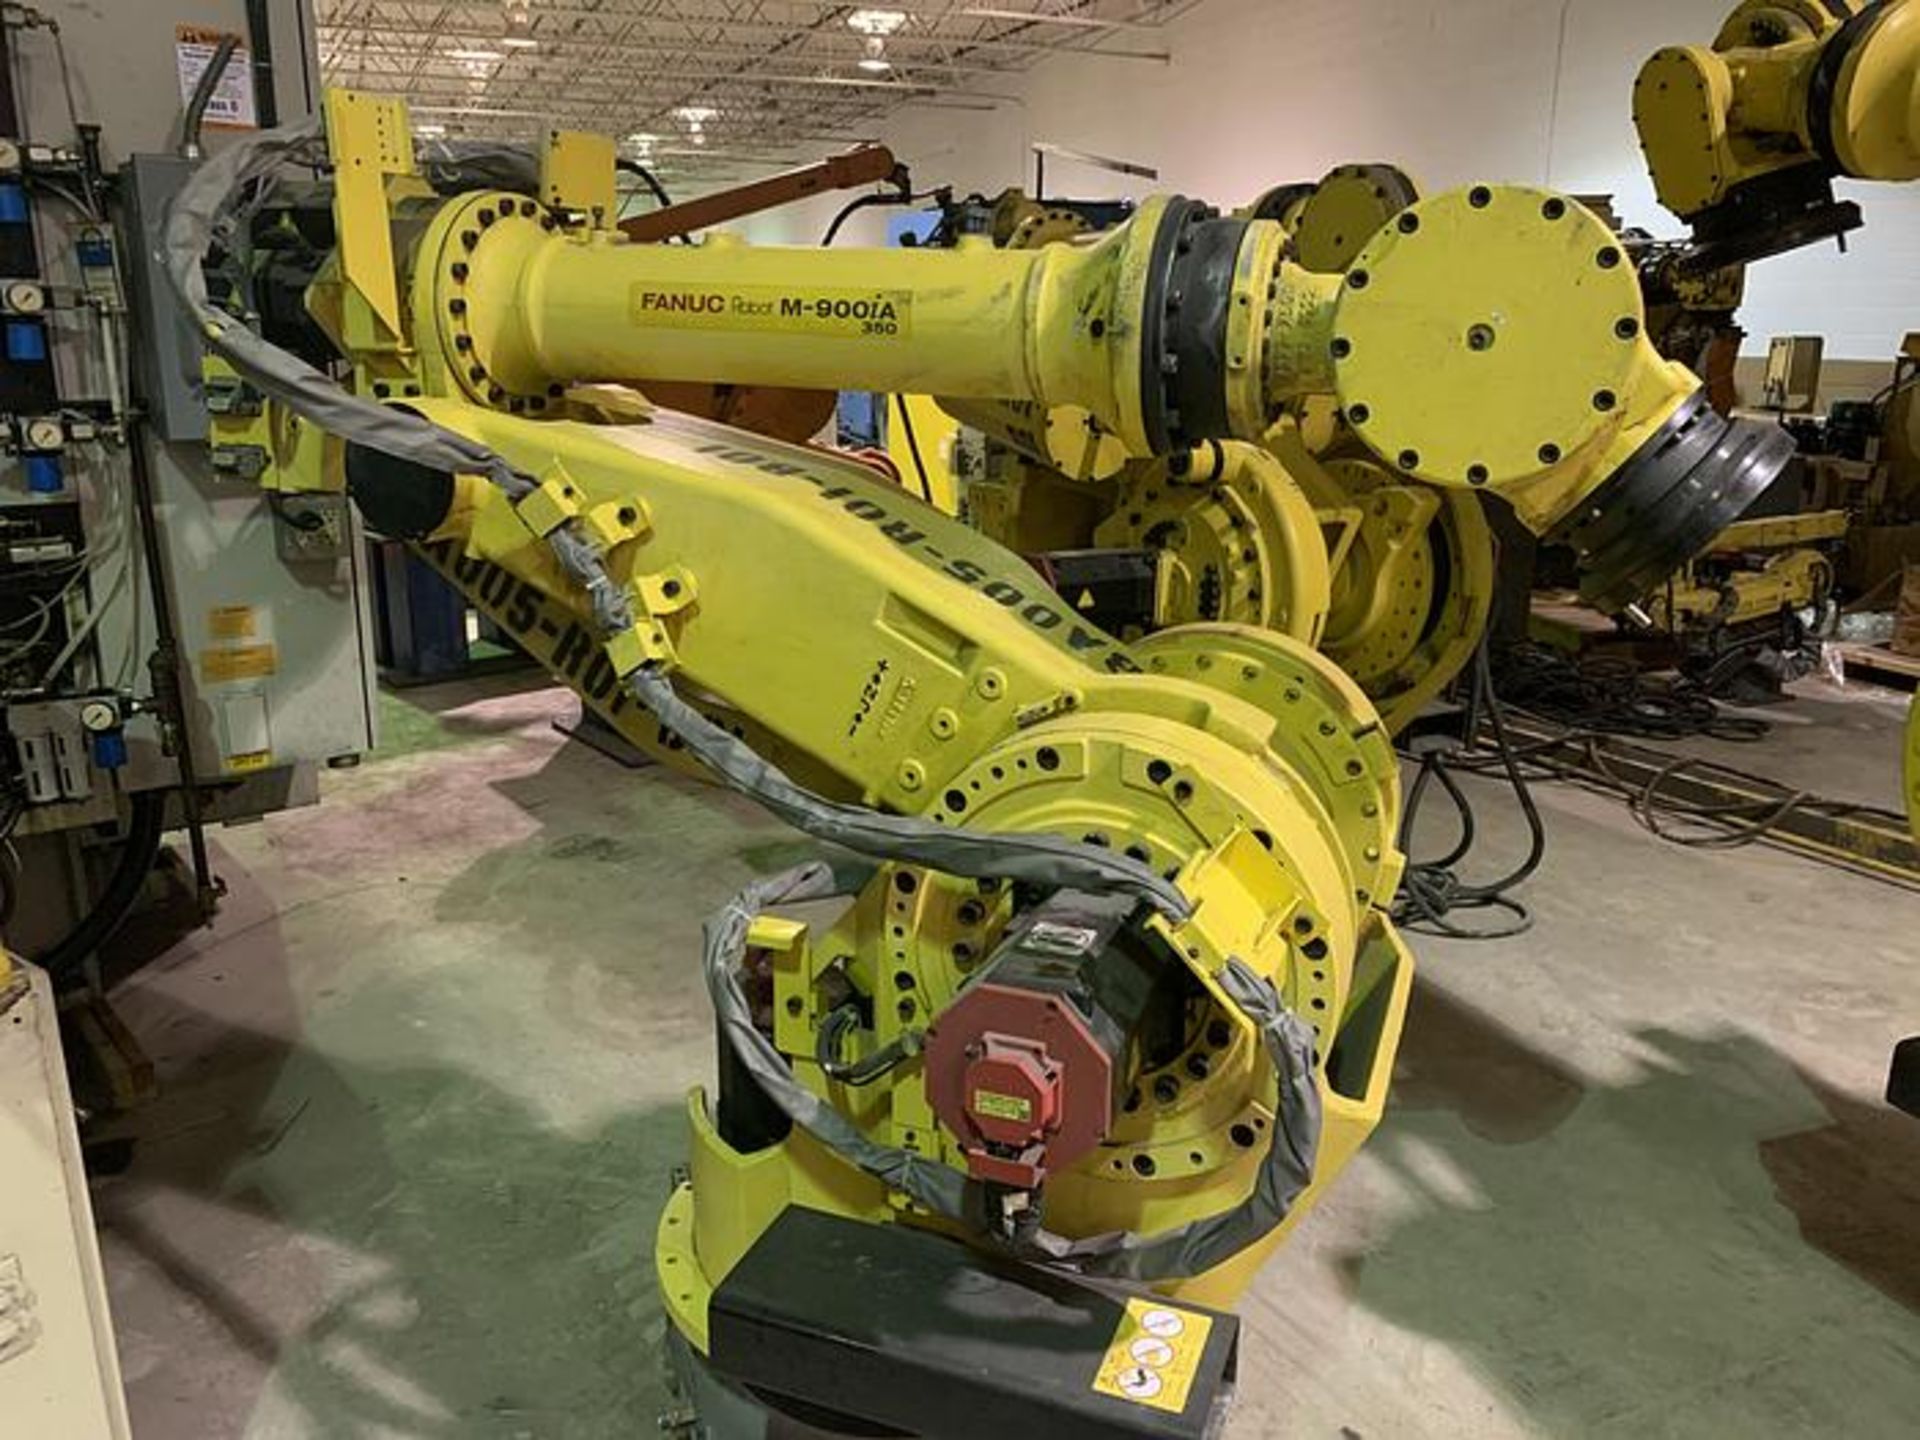 FANUC ROBOT M900iA/350 6 AXIS ROBOTS WITH R30iA CONTROLLERS, 350KG X 2650mm REACH